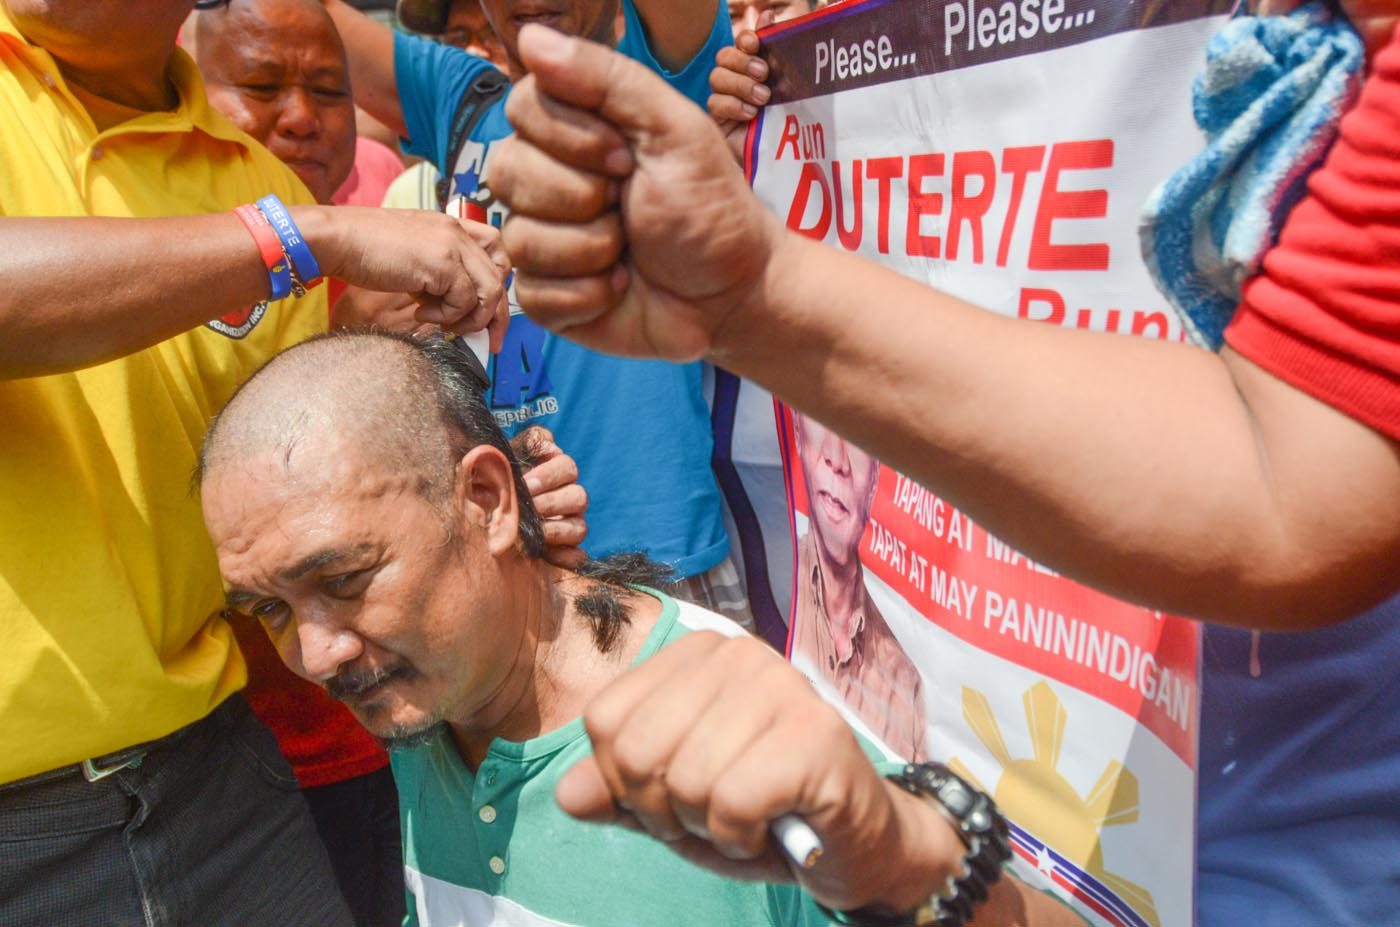 STILL WAITING. Melvin Salupan, a seaman, has his head shaved on October 15, 2015 outside Comelec Intramuros to express his support for a Duterte presidential candidacy. Photo by Alecs Ongcal/Rappler  